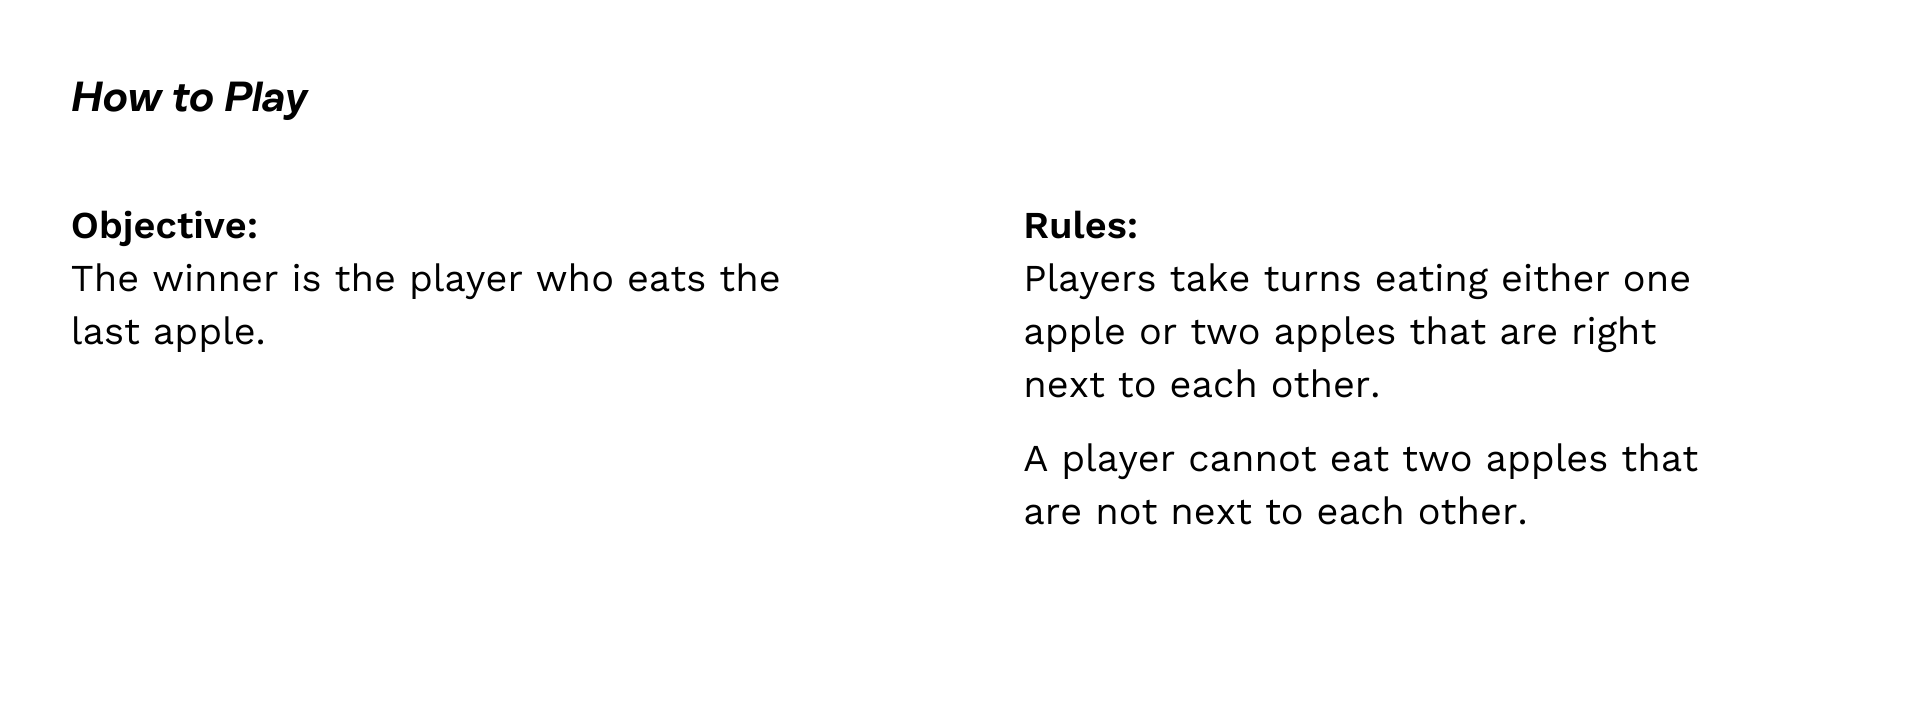 The winner is the player who eats the last apple. Rules: Players take turns eating either one apple or two apples that are right next to each other. A player cannot eat two apples that are not next to each other.